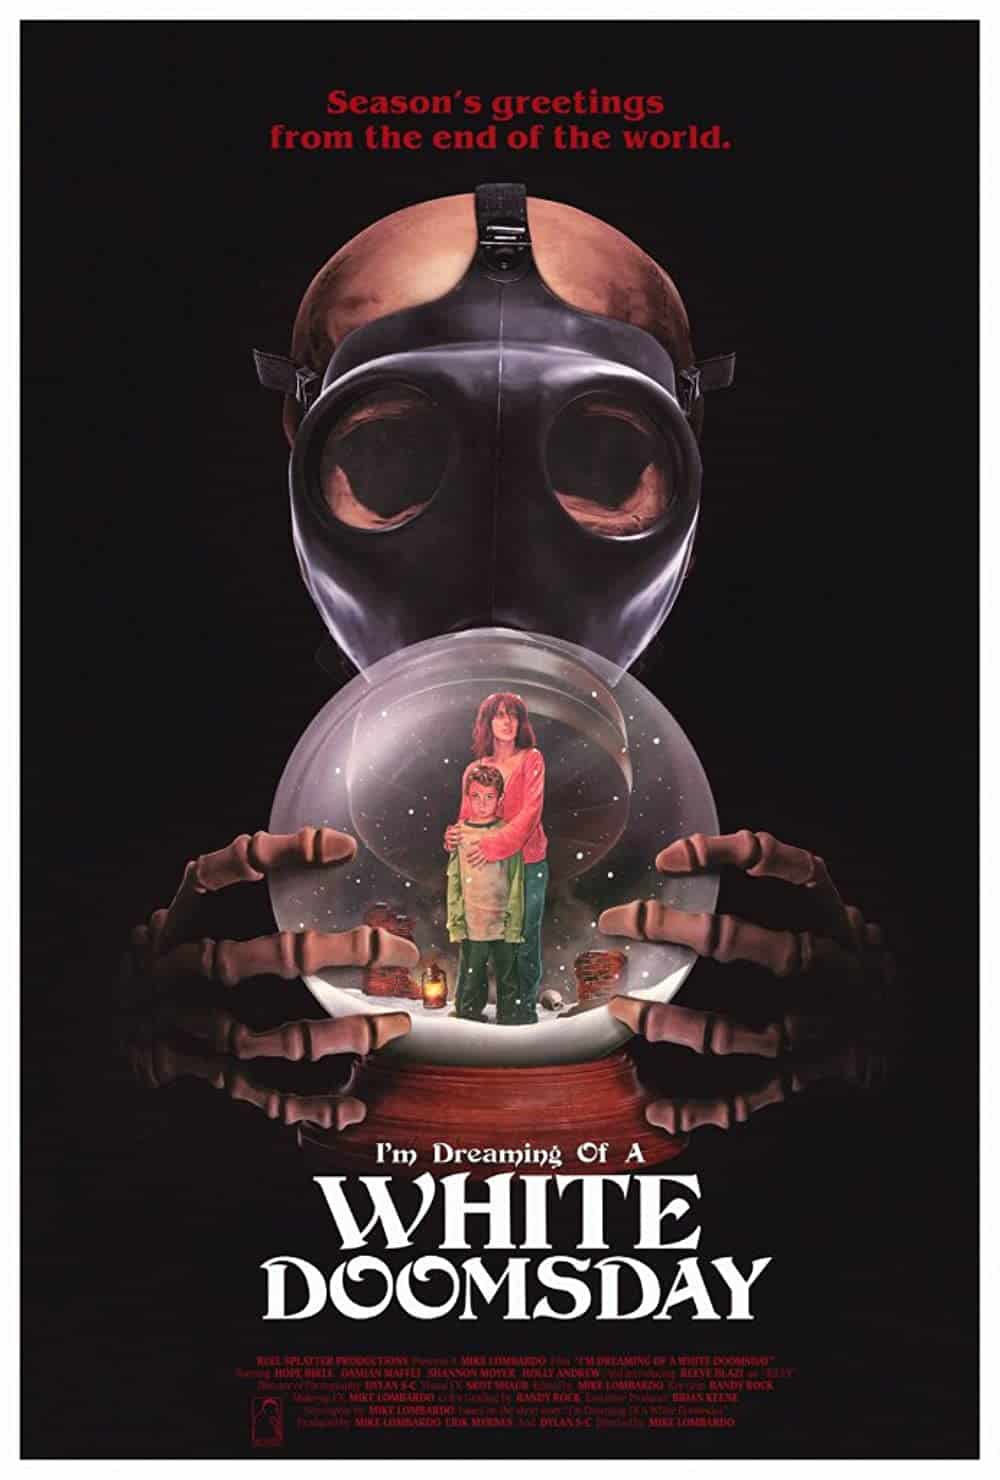 Mike’s Review: I’m Dreaming of a White Doomsday (2017)